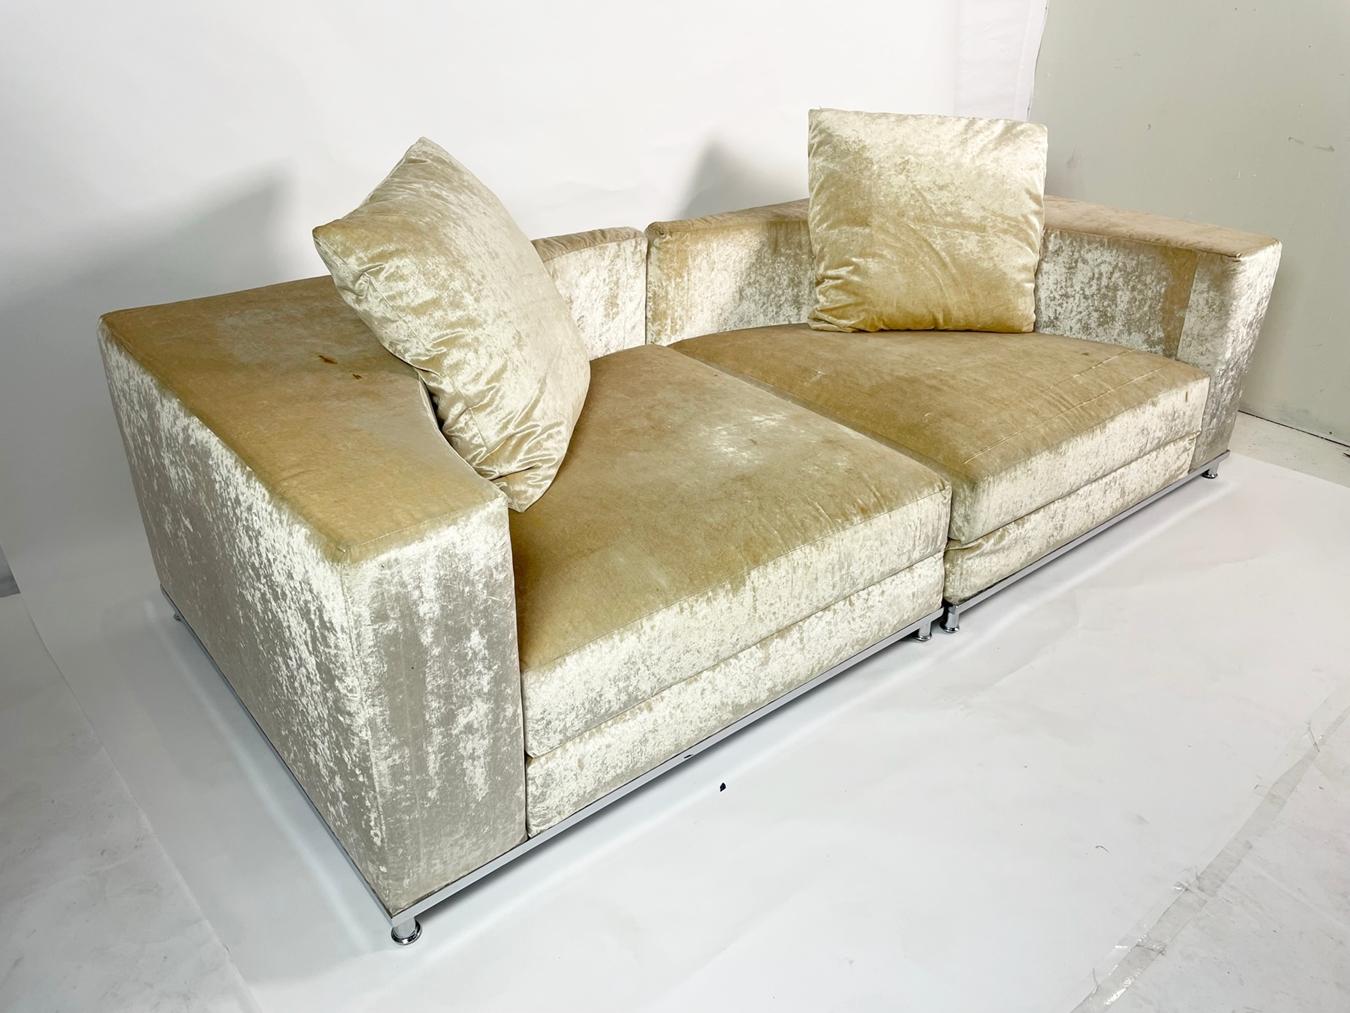 2 piece sectional sofa designed and manufactured in Italy by Saba Italia.

The sofa has a chrome base with removable cushions and it comes with 2 pillows, a very modern and cool take on sectional seating.

The sofa is not longer in